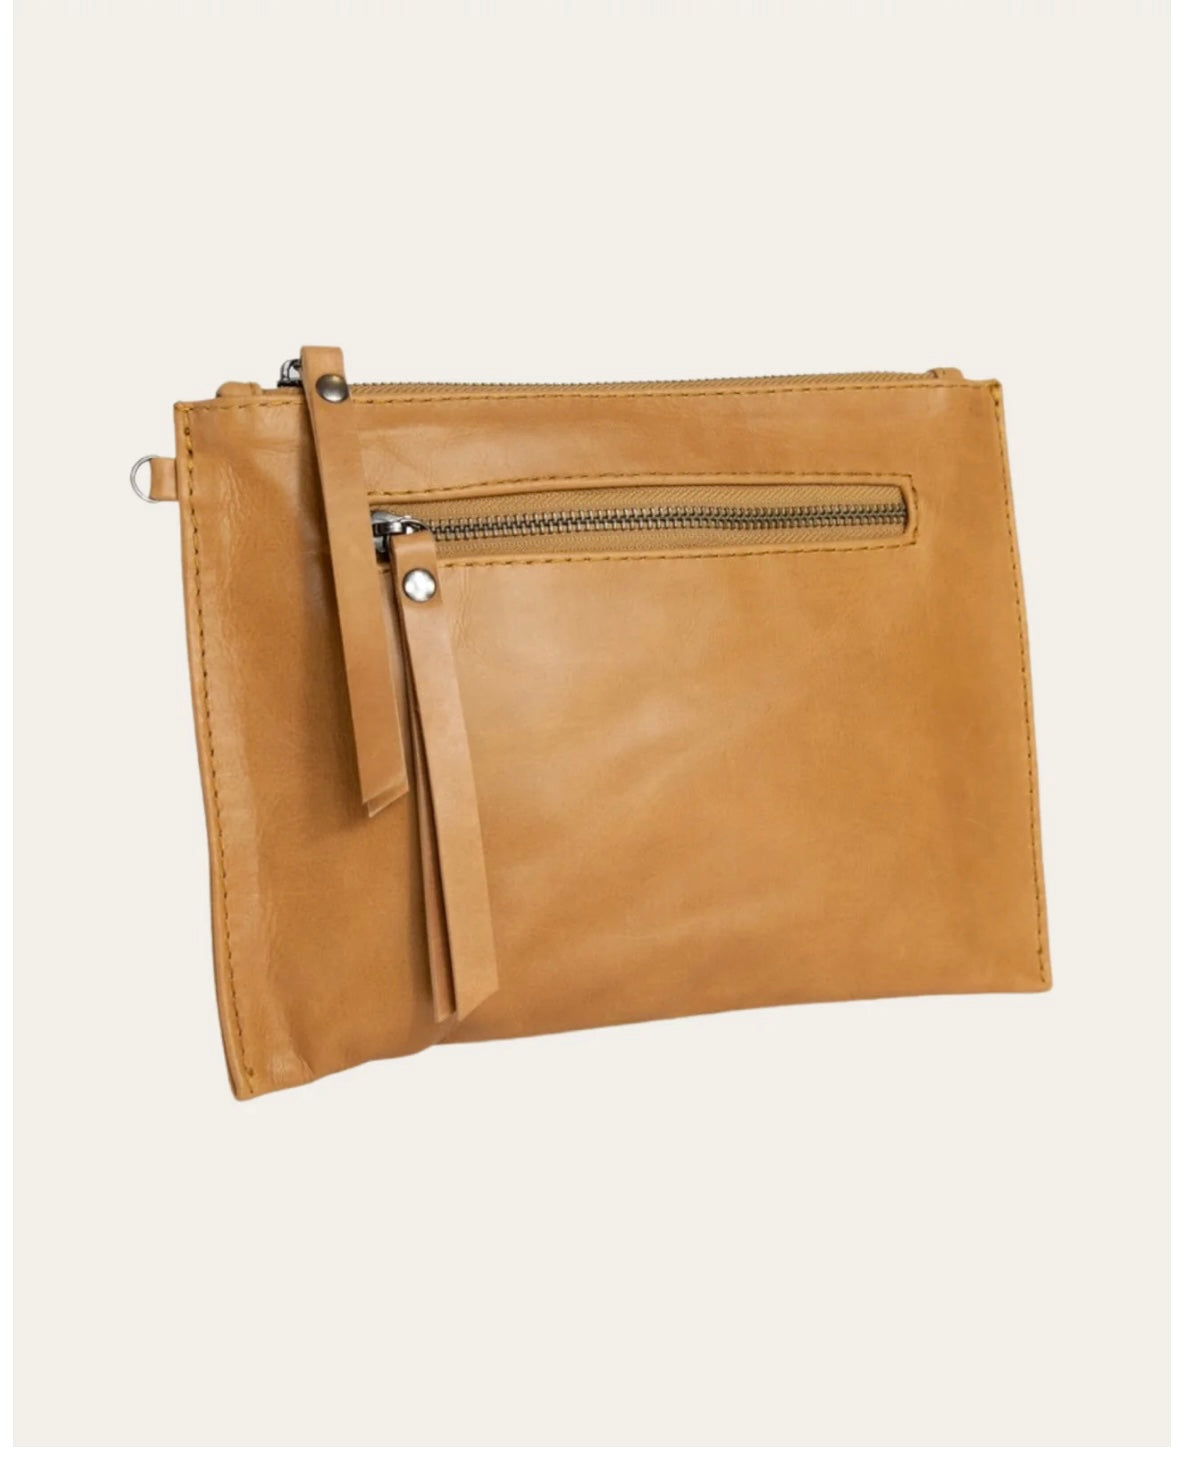 Bare Leather Coco Clutch